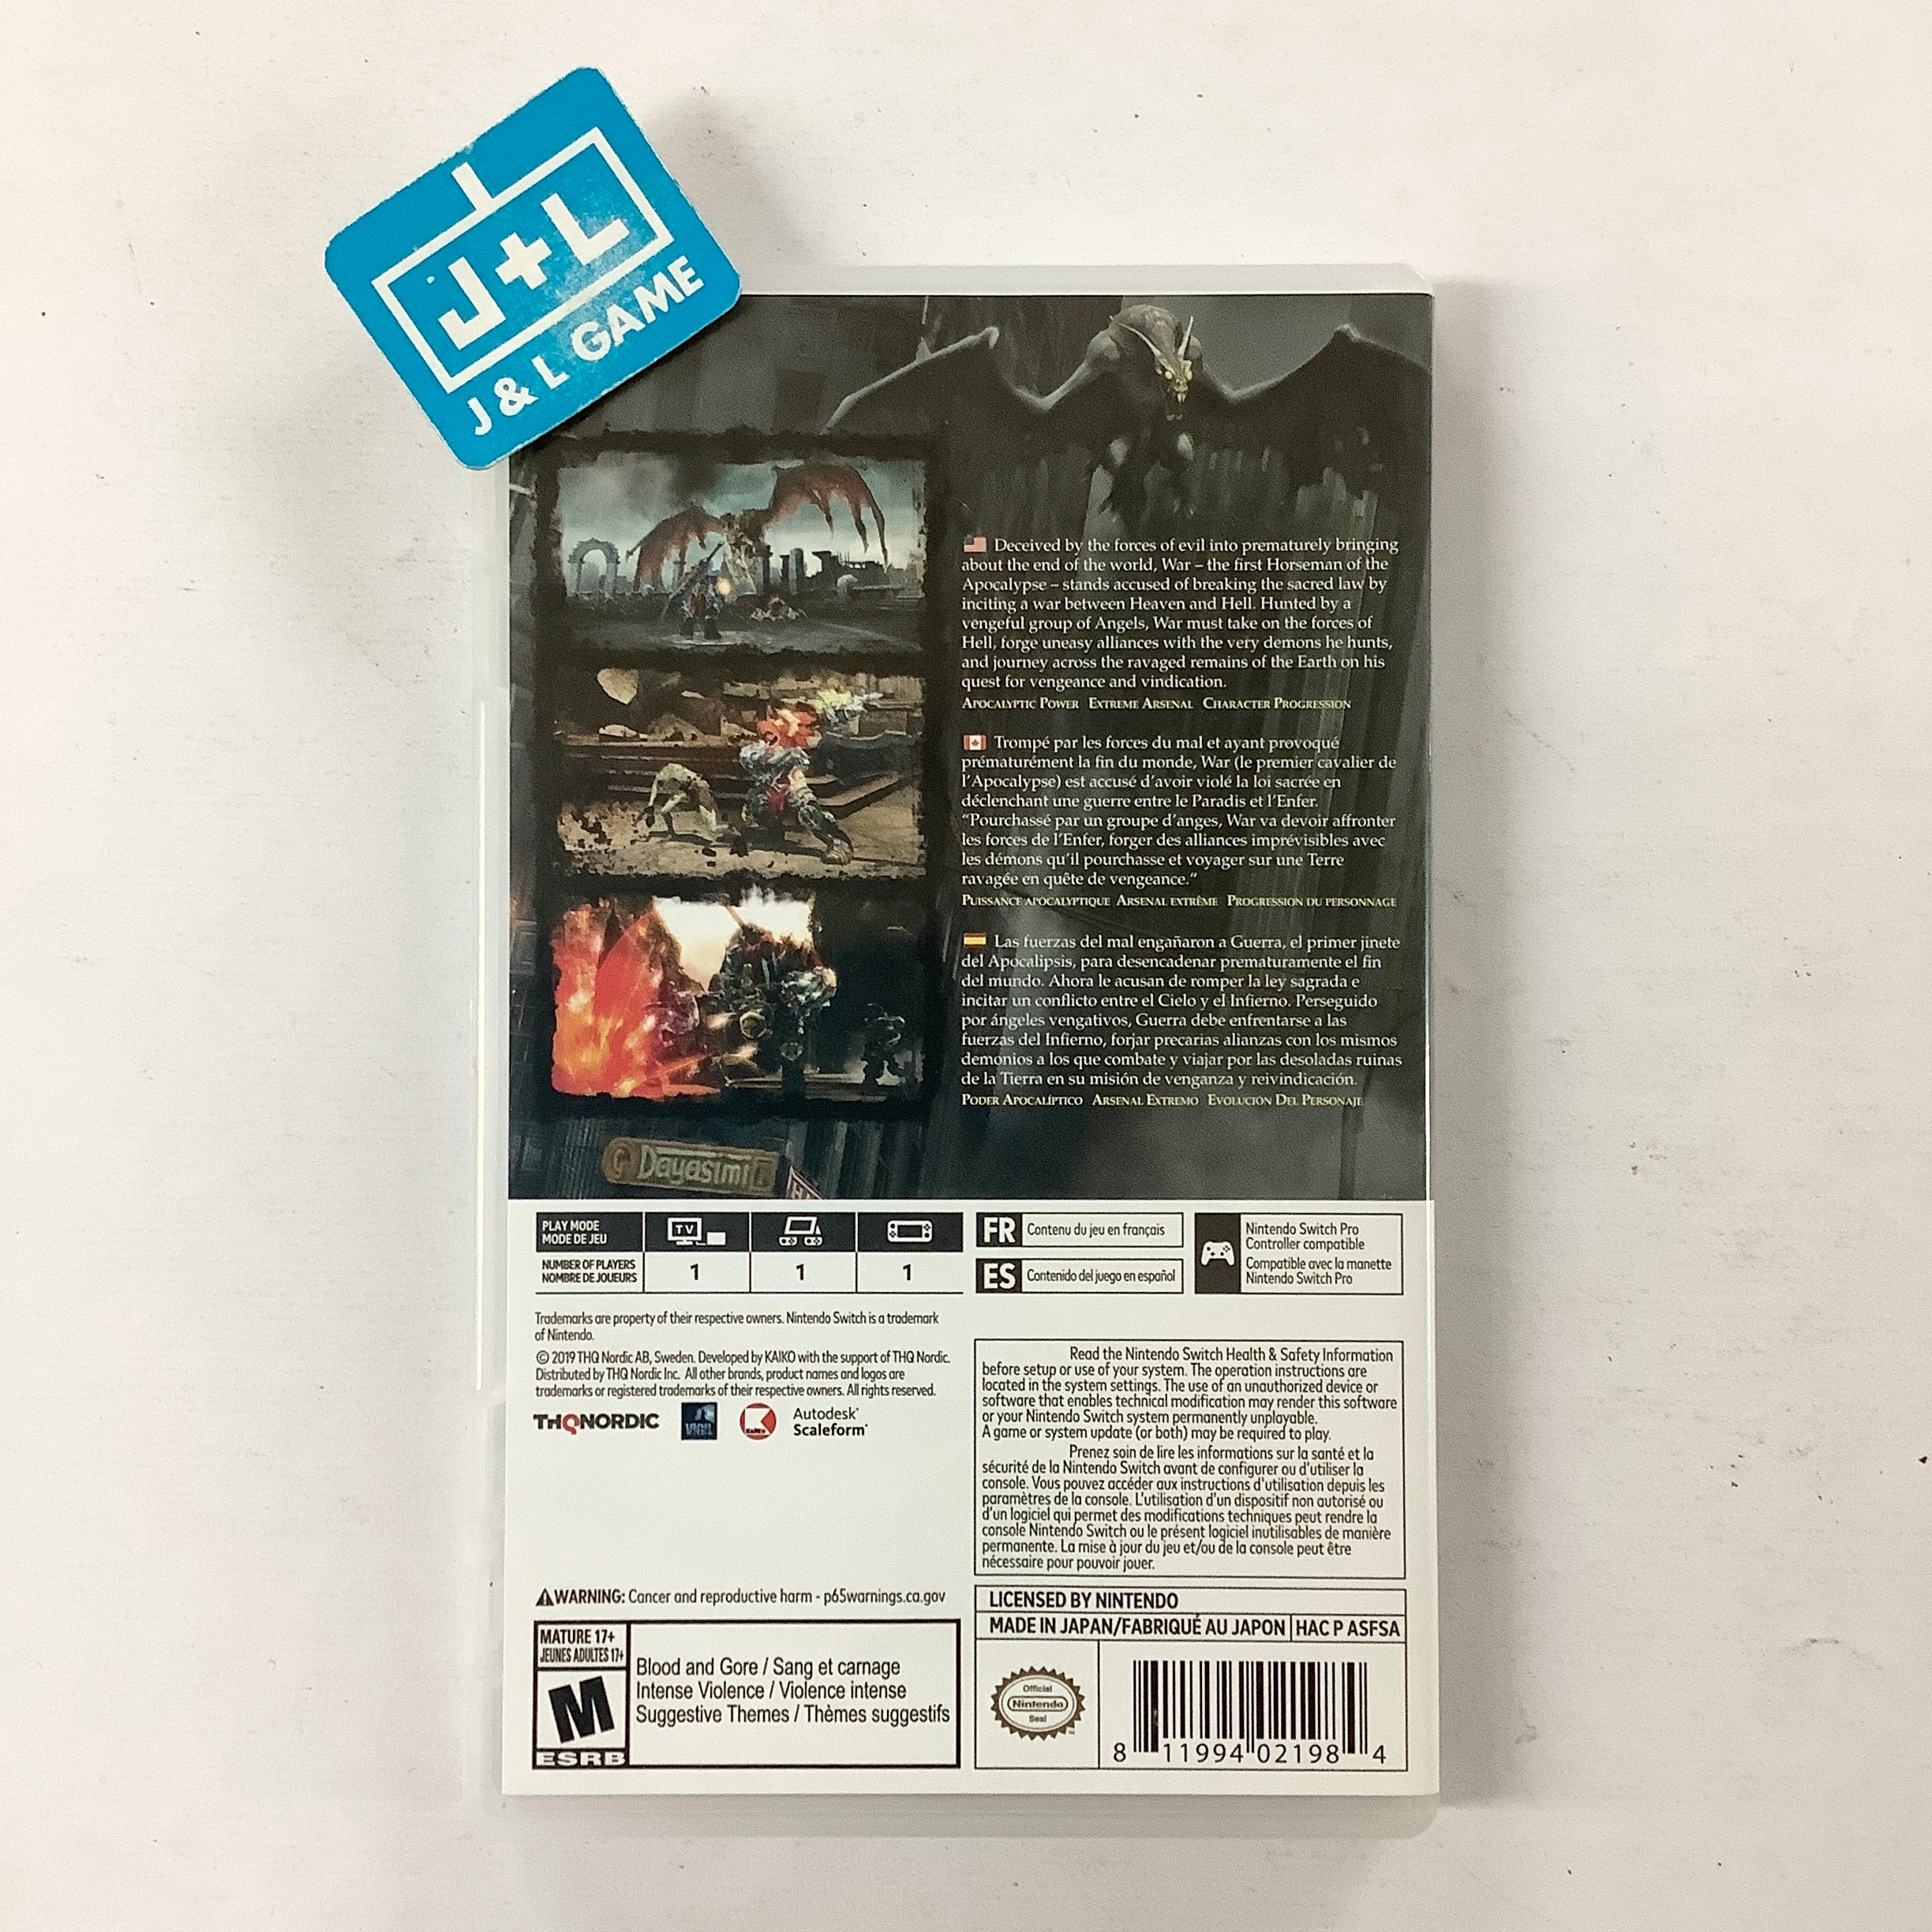 Darksiders: Warmastered Edition - (NSW) Nintendo Switch [Pre-Owned] Video Games THQ Nordic   